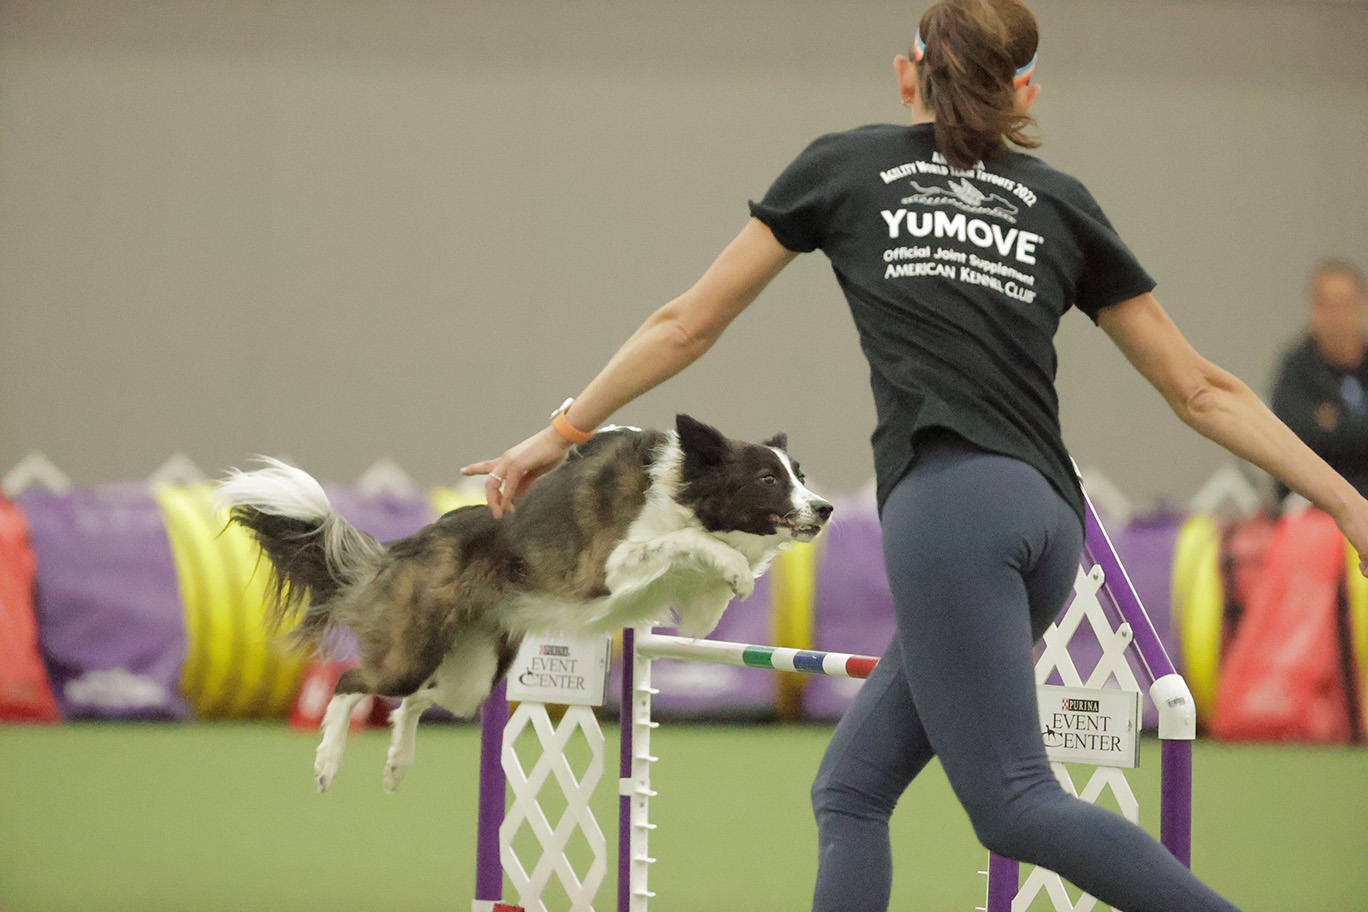 2022 World Team Tryouts Purina Farms Events AKC National Events